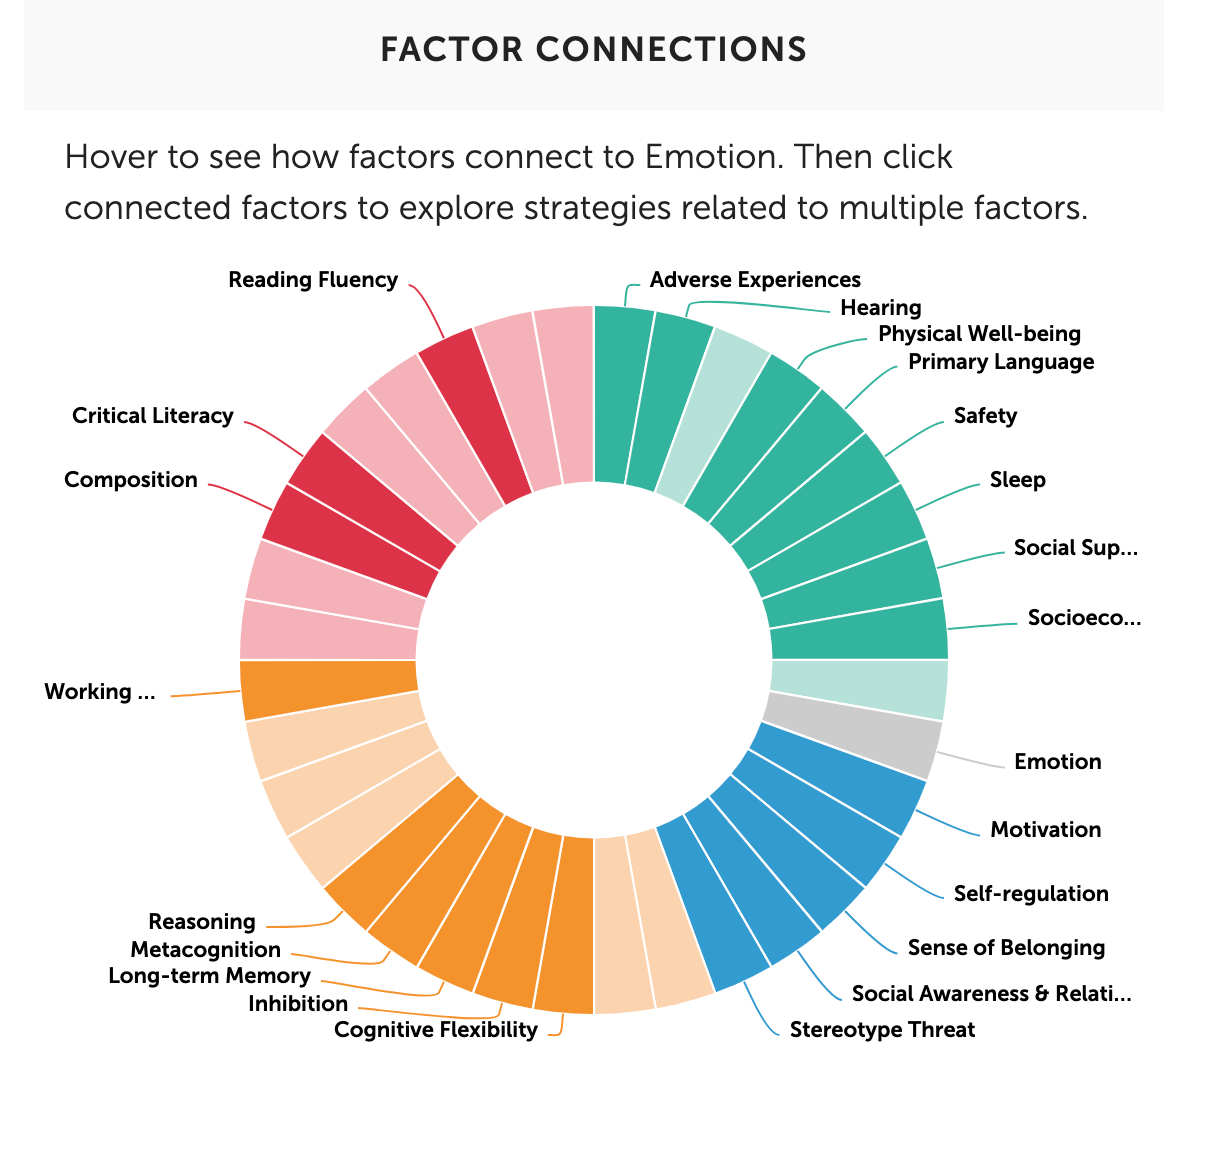 Example of a factor connections wheel for the Literacy 4-6 learner model "Emotion" factor, showing connections to 22 factors across each factor category.